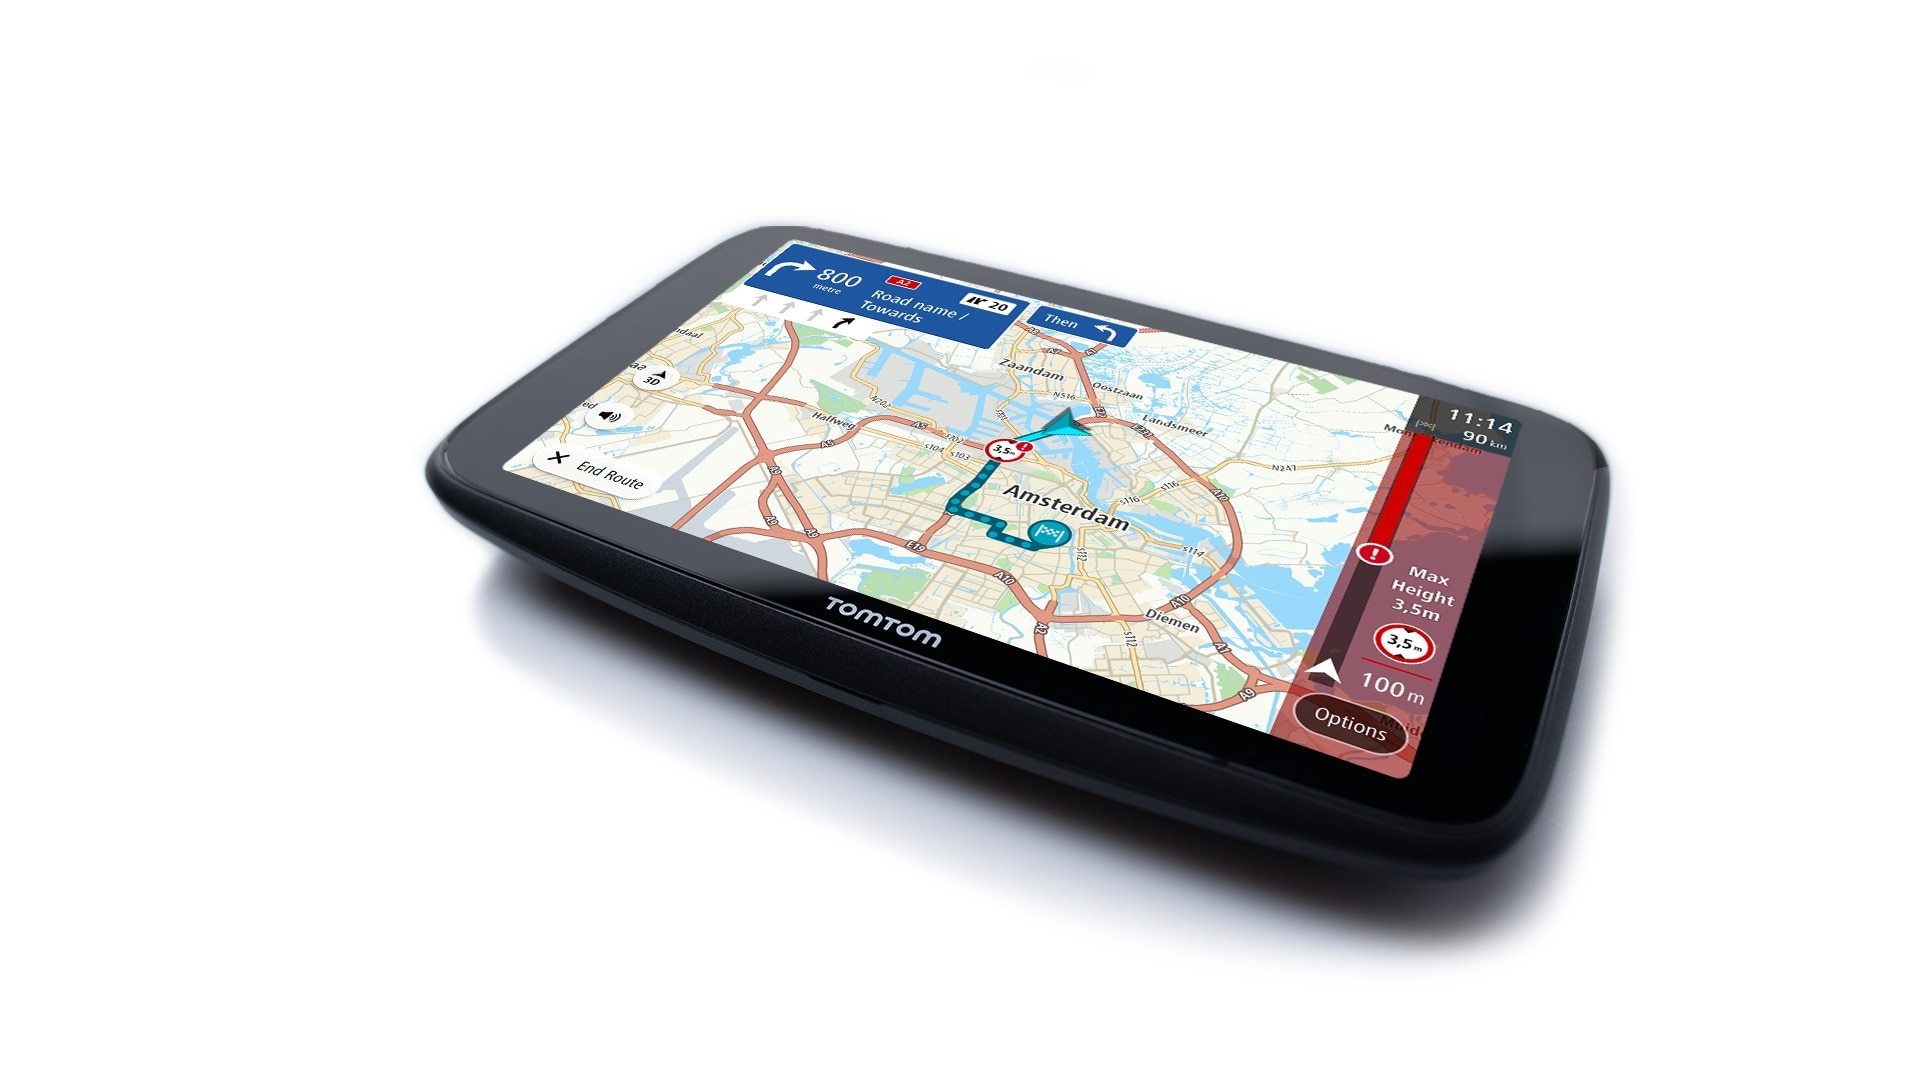 Navigate with ease from a 7” touchscreen